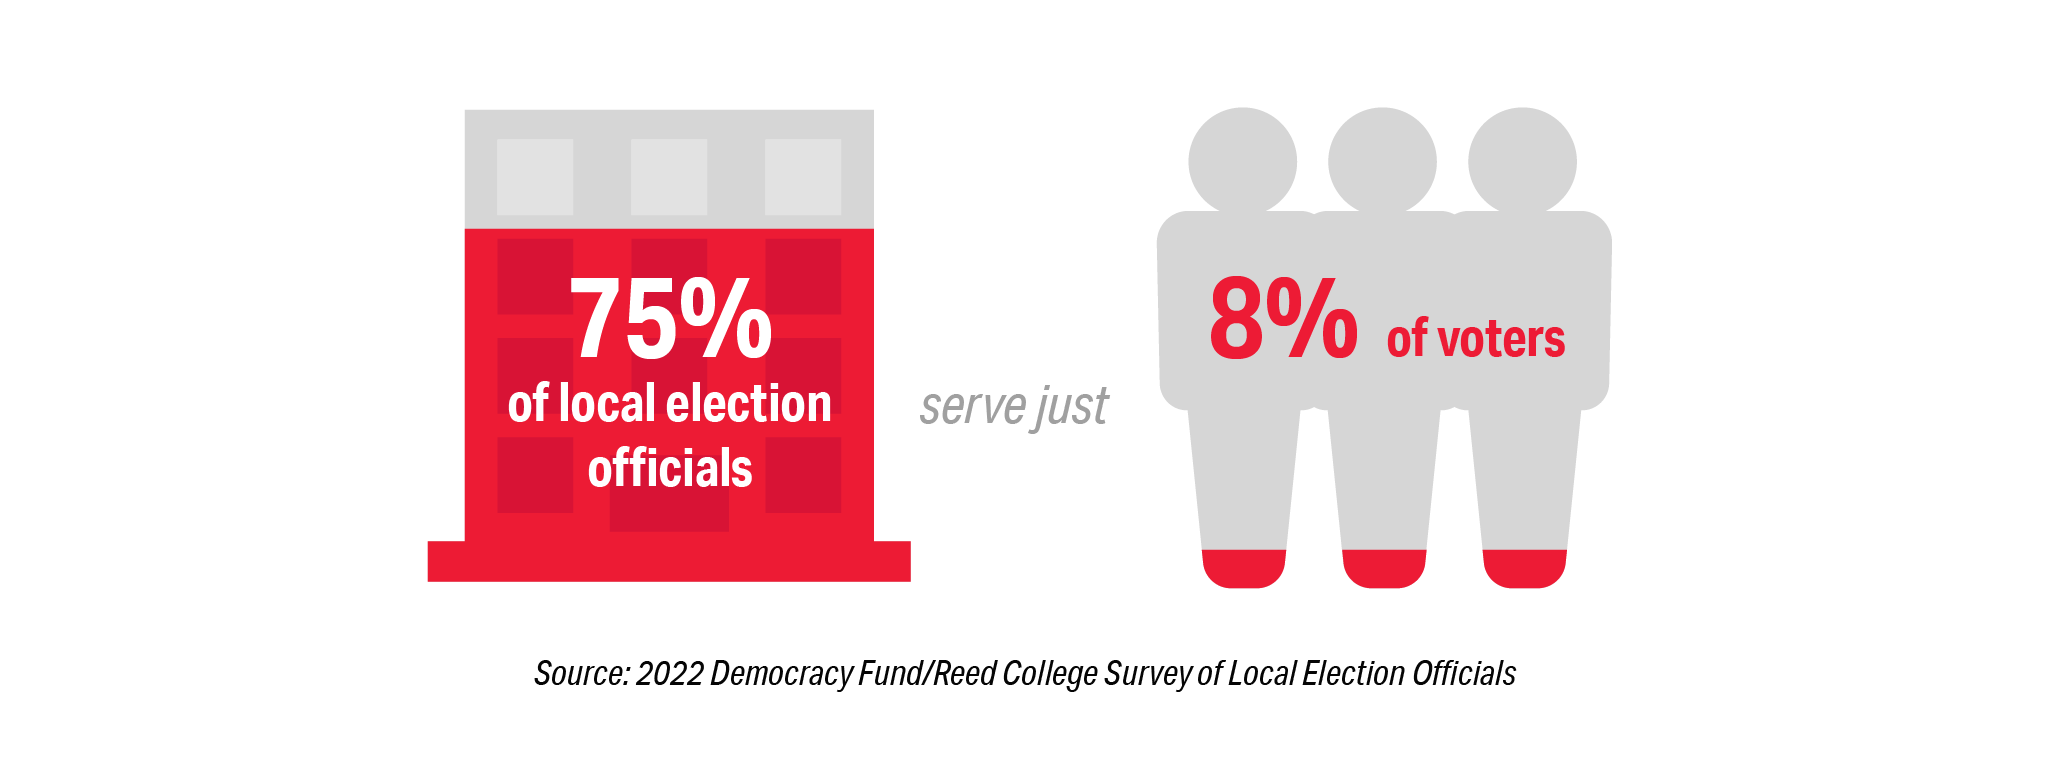 Graphic of building and people stating that 75% of local election officials serve 8% of voters